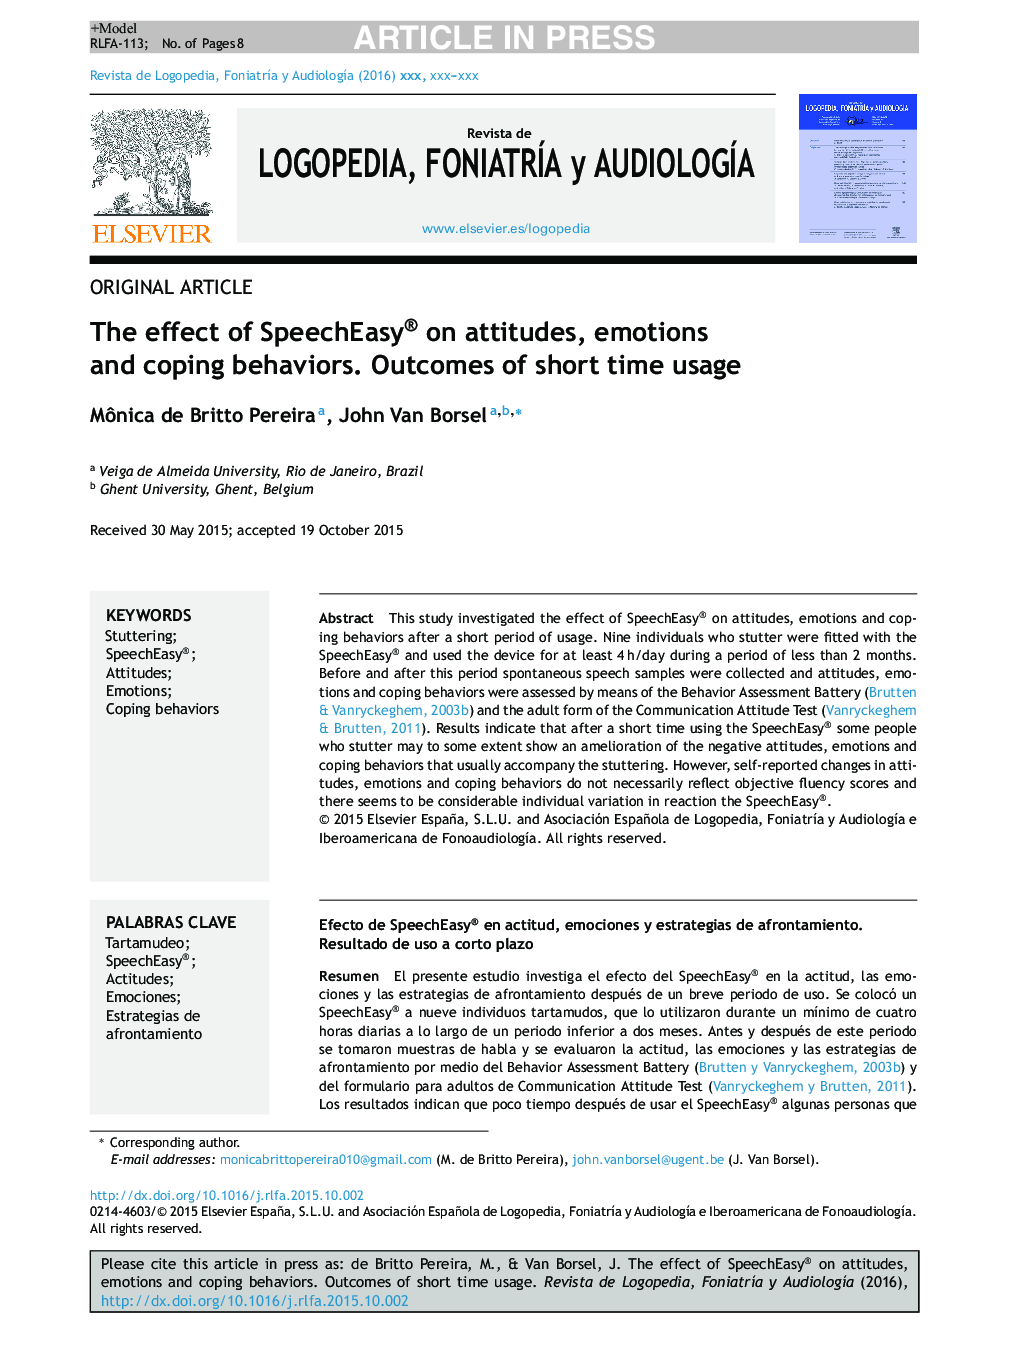 The effect of SpeechEasy® on attitudes, emotions and coping behaviors. Outcomes of short time usage